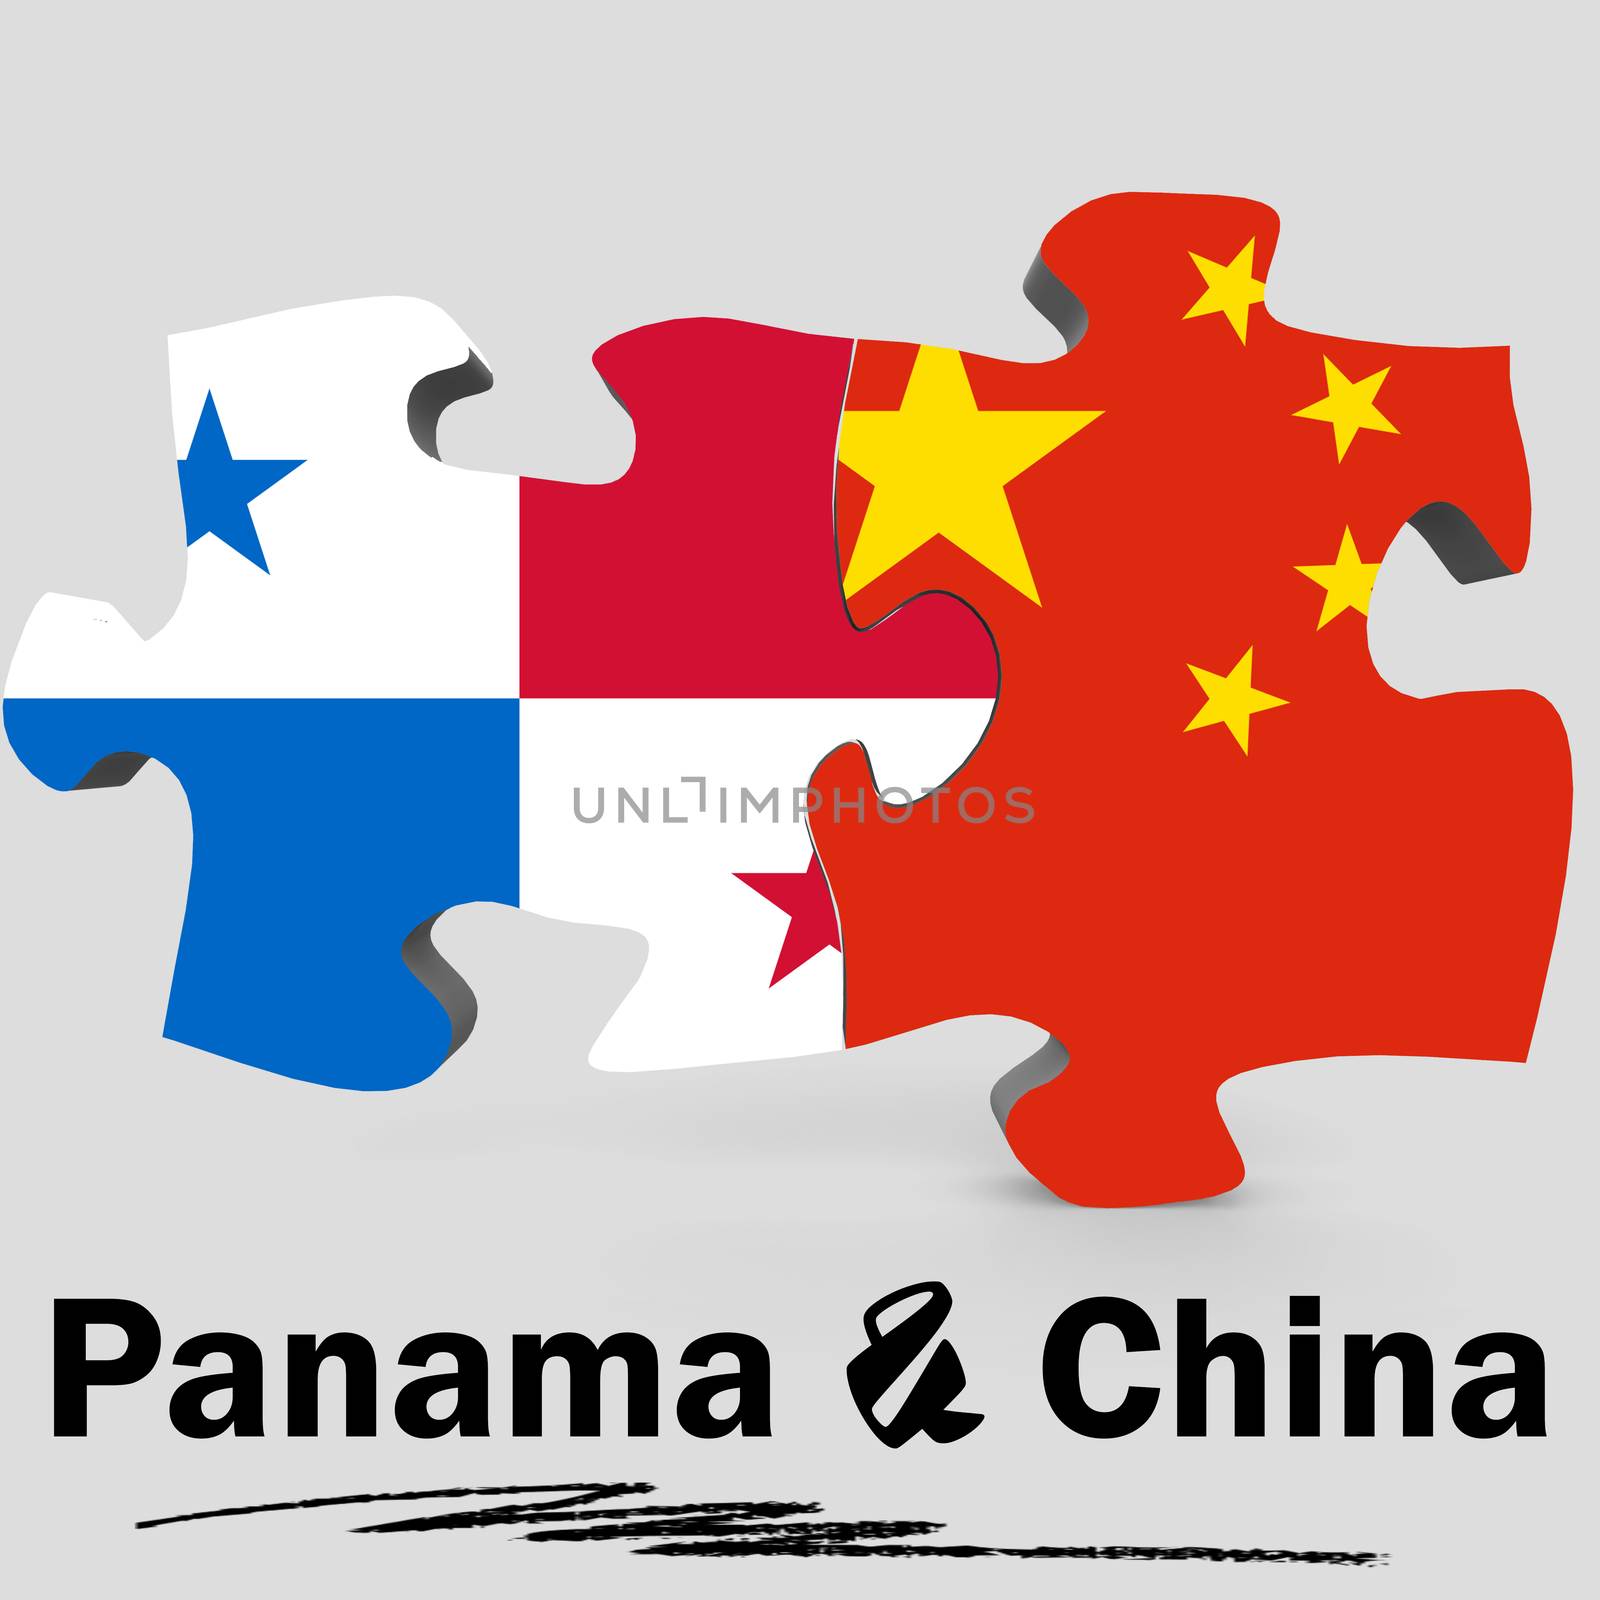 China and Panama flags in puzzle by tang90246